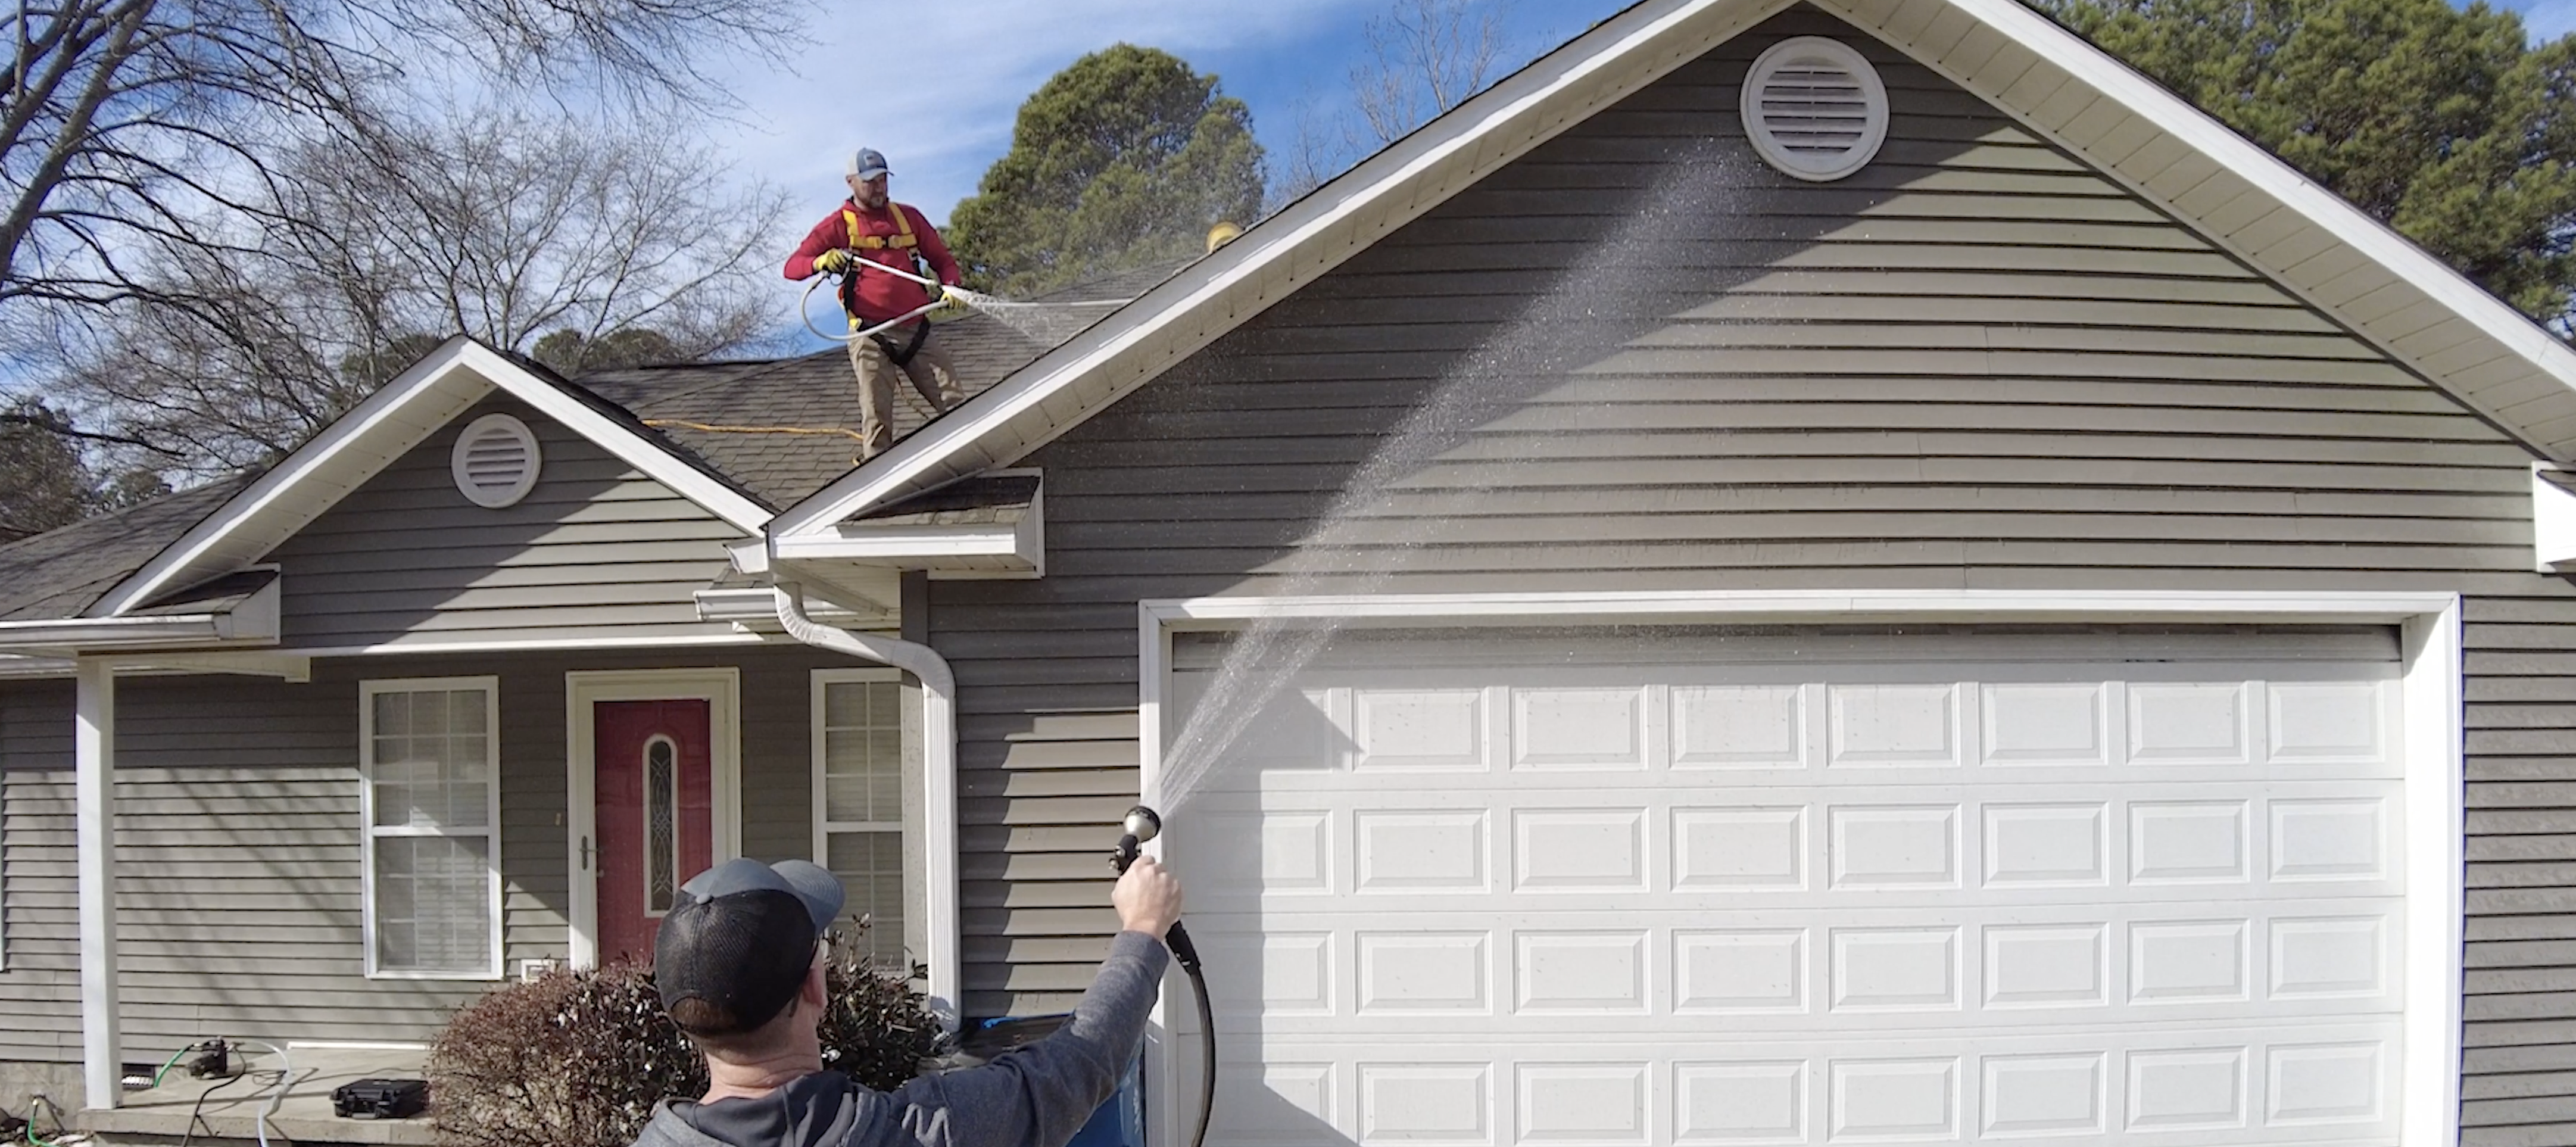 Two Quick Safety Tips for Roof Cleaning and Rejuvenation. – Roof Shield